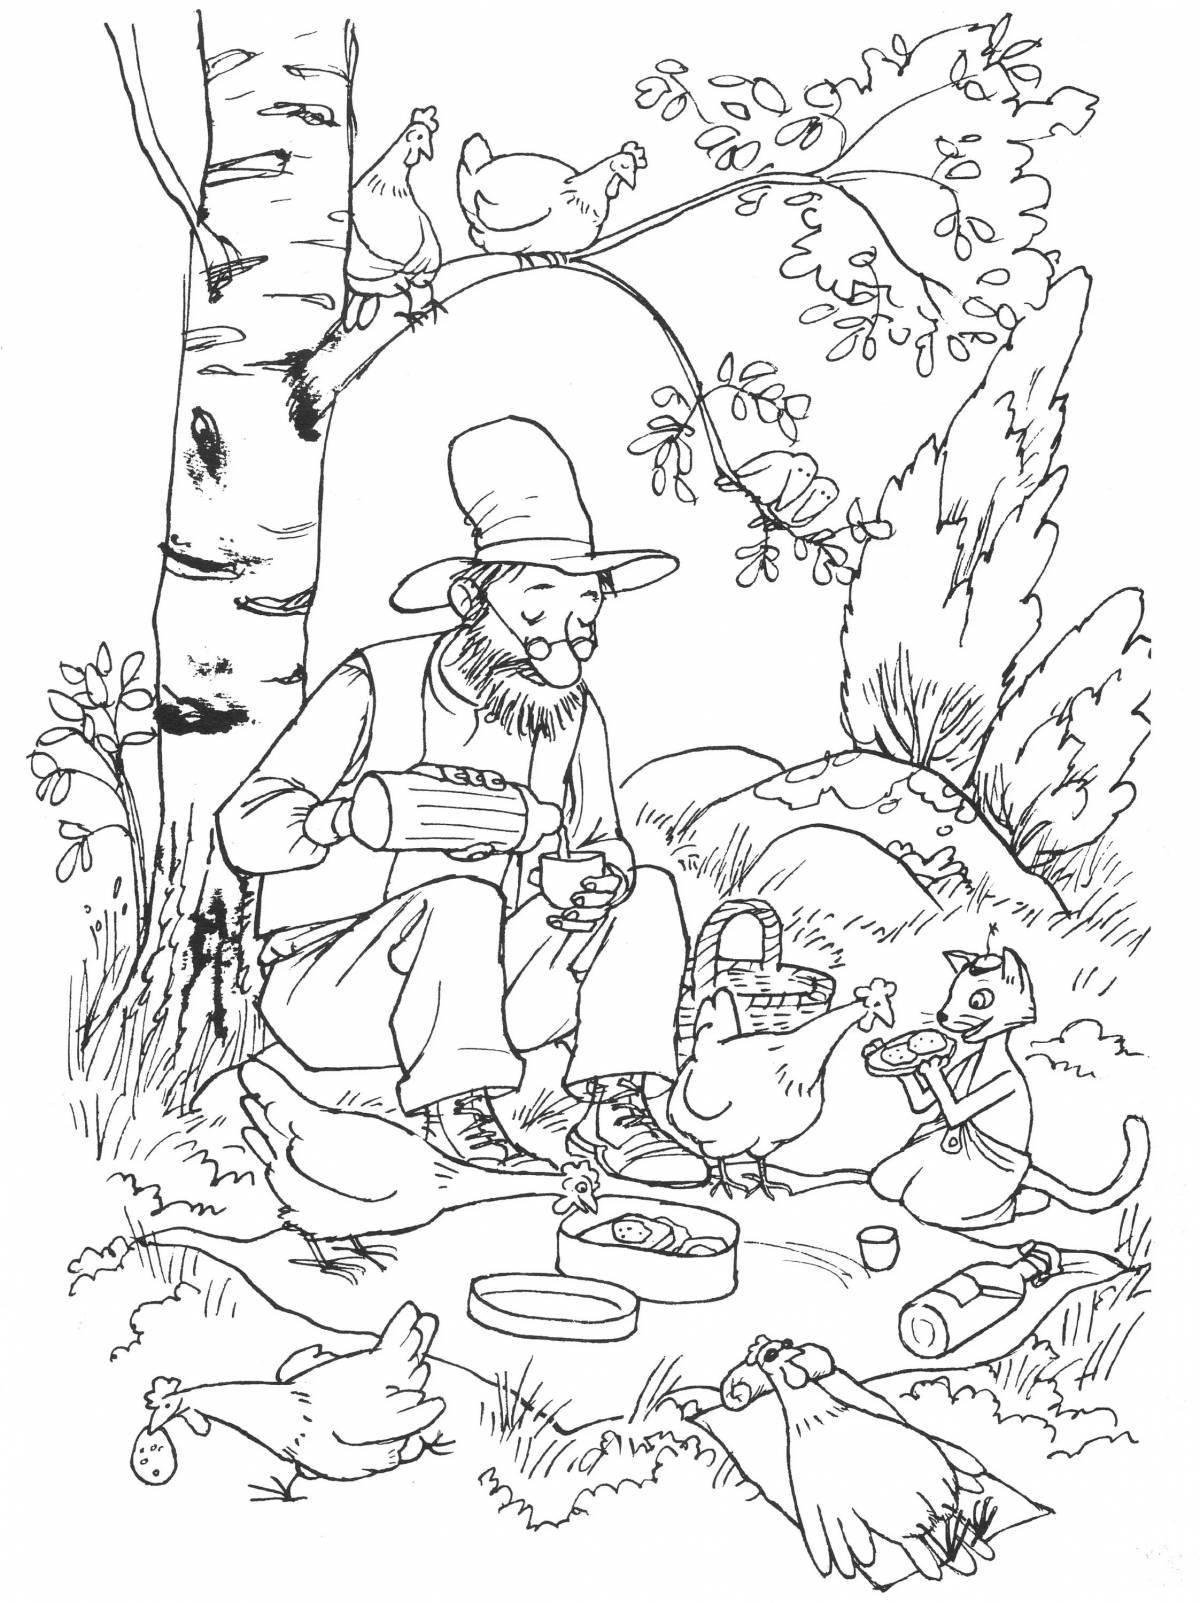 Findus and petson funny coloring book